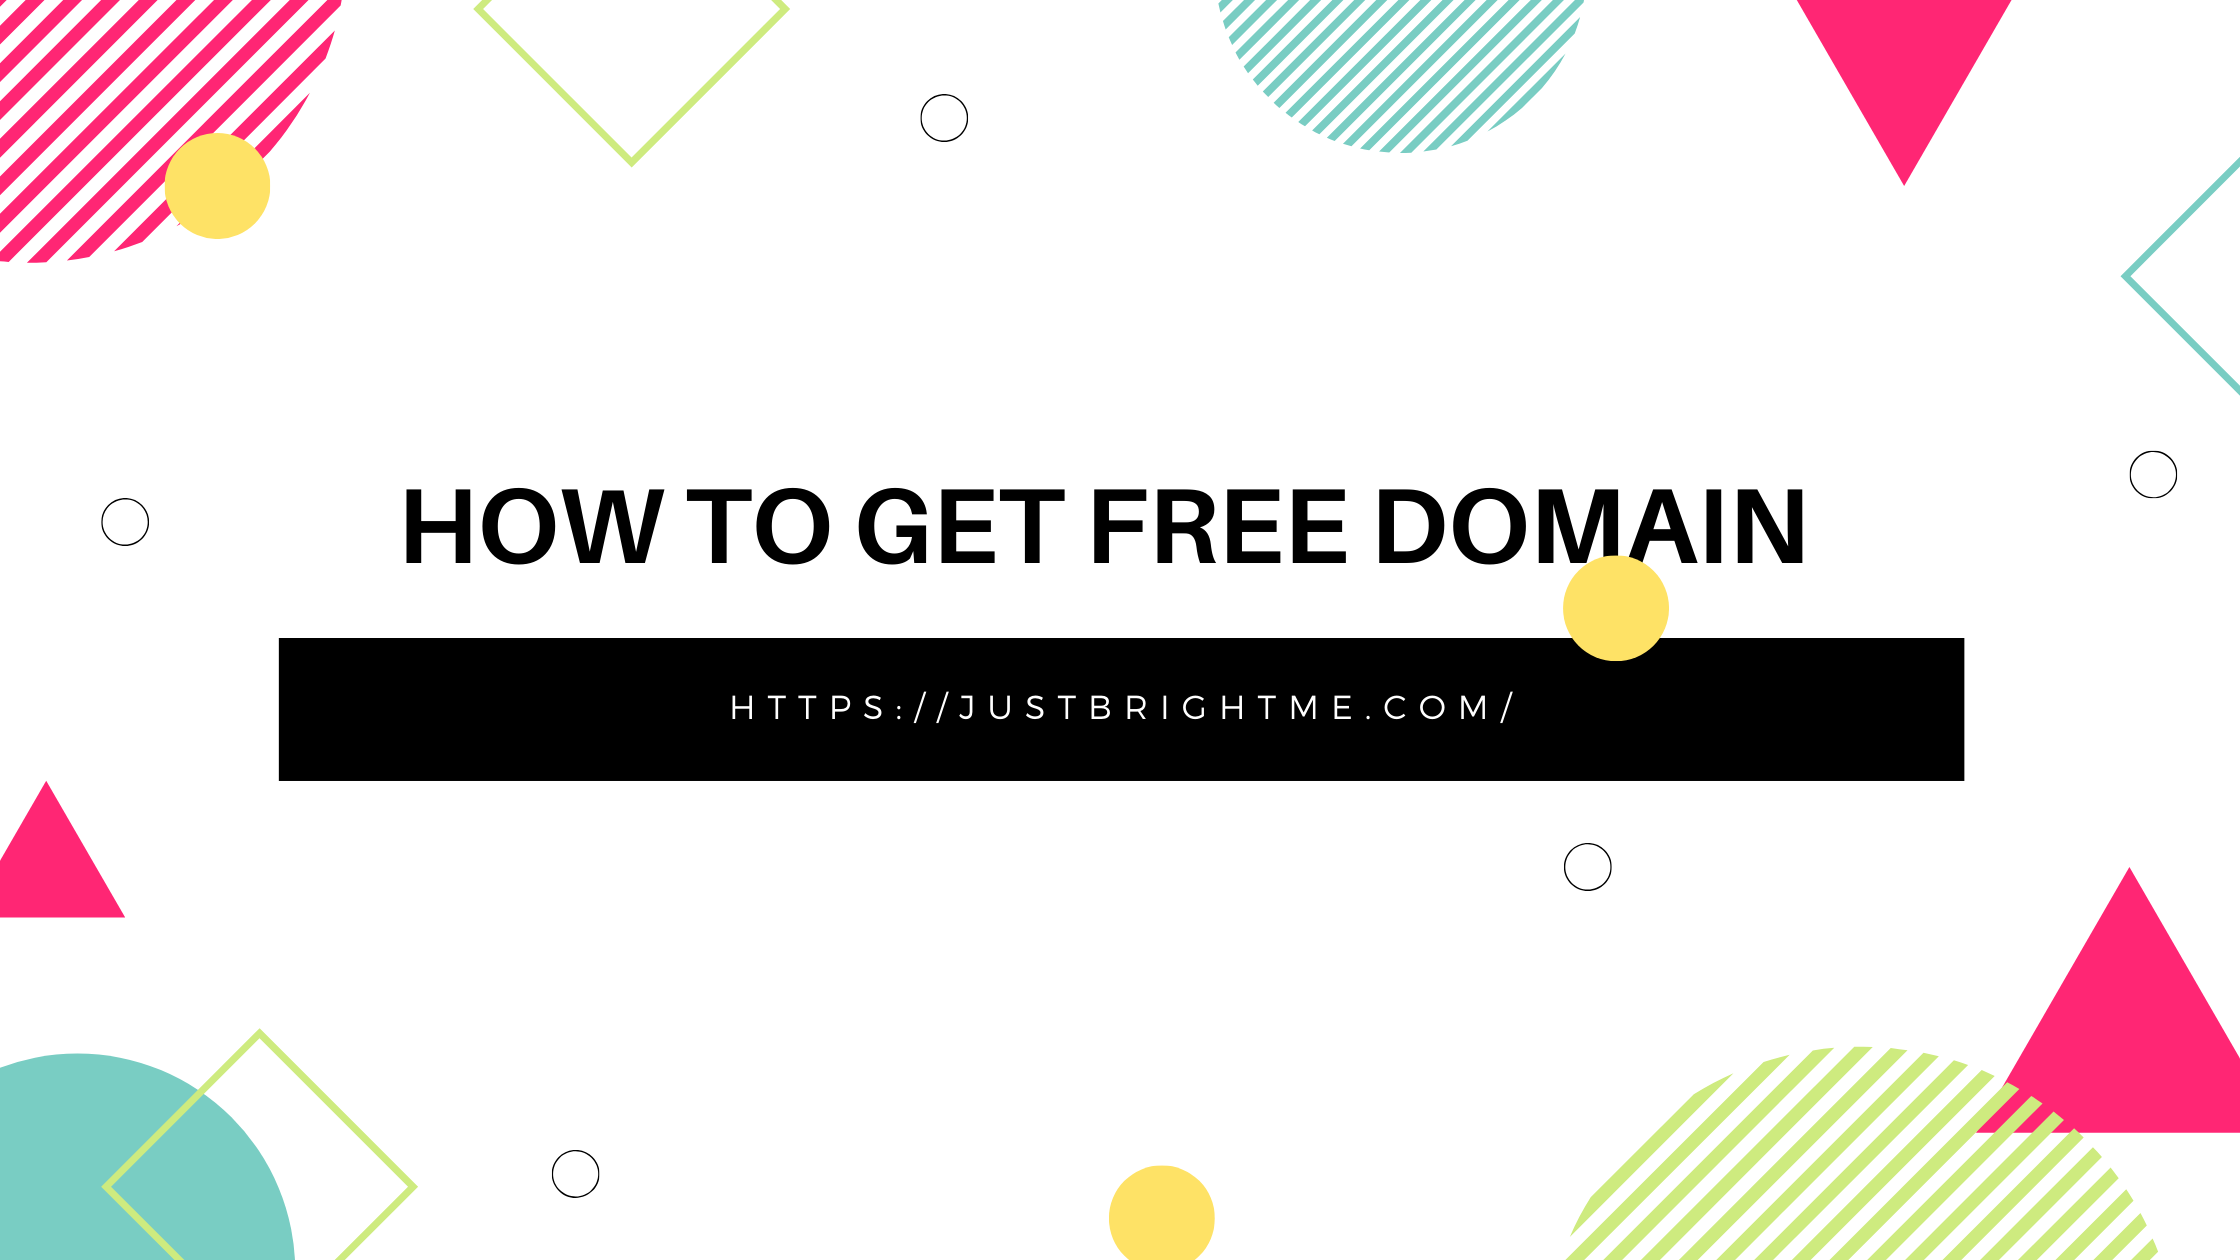 How To Get Free Domain For Your Website in 2020